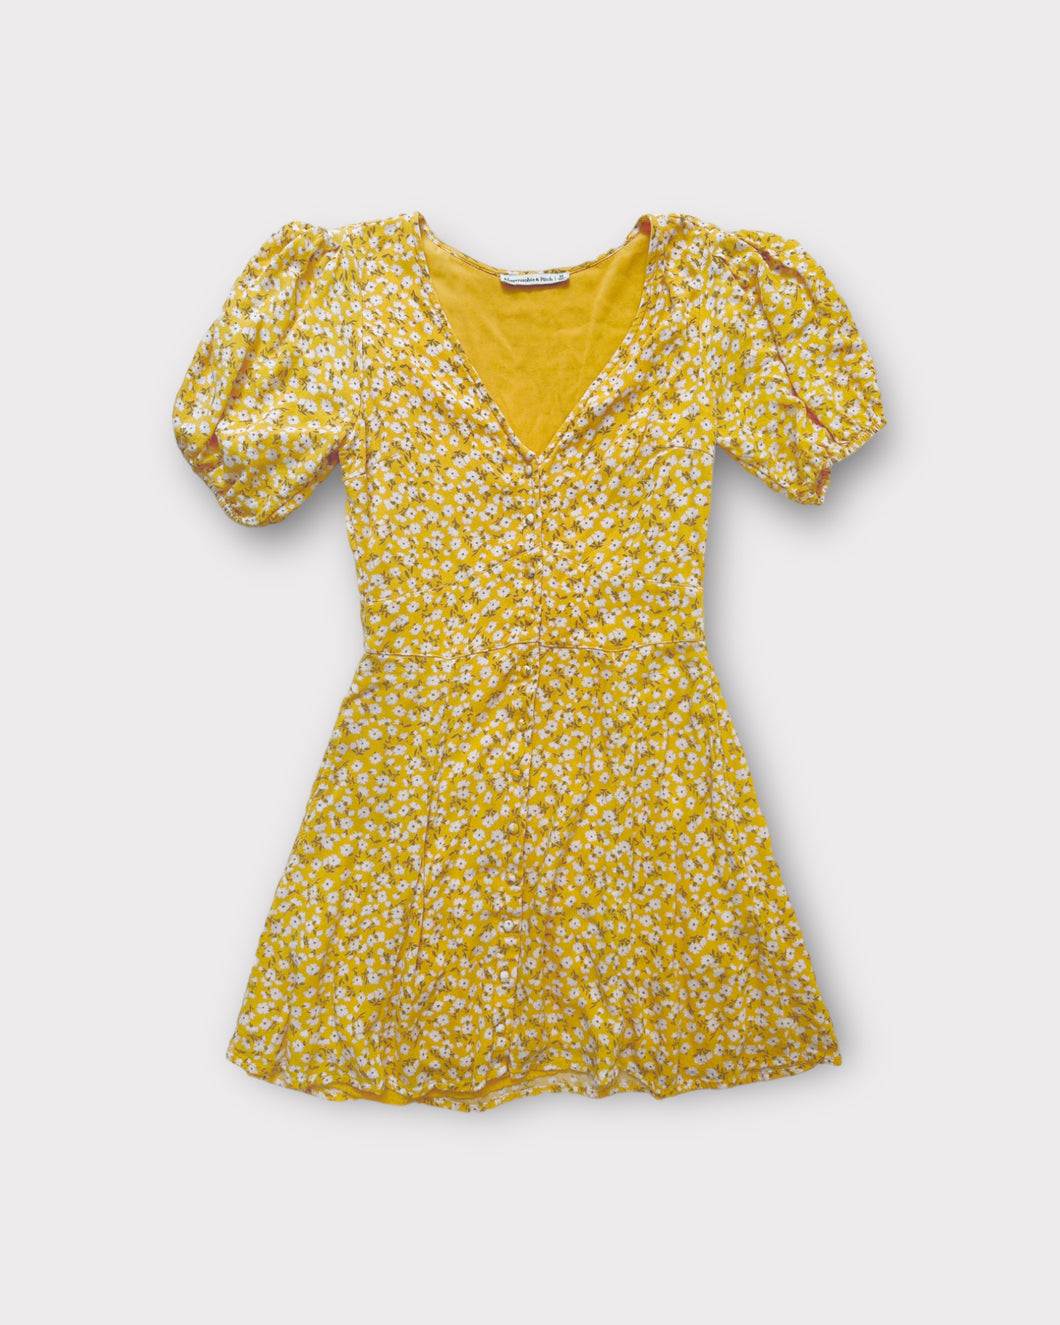 Abercrombie & Fitch Yellow Button Up Mini Dress (M)